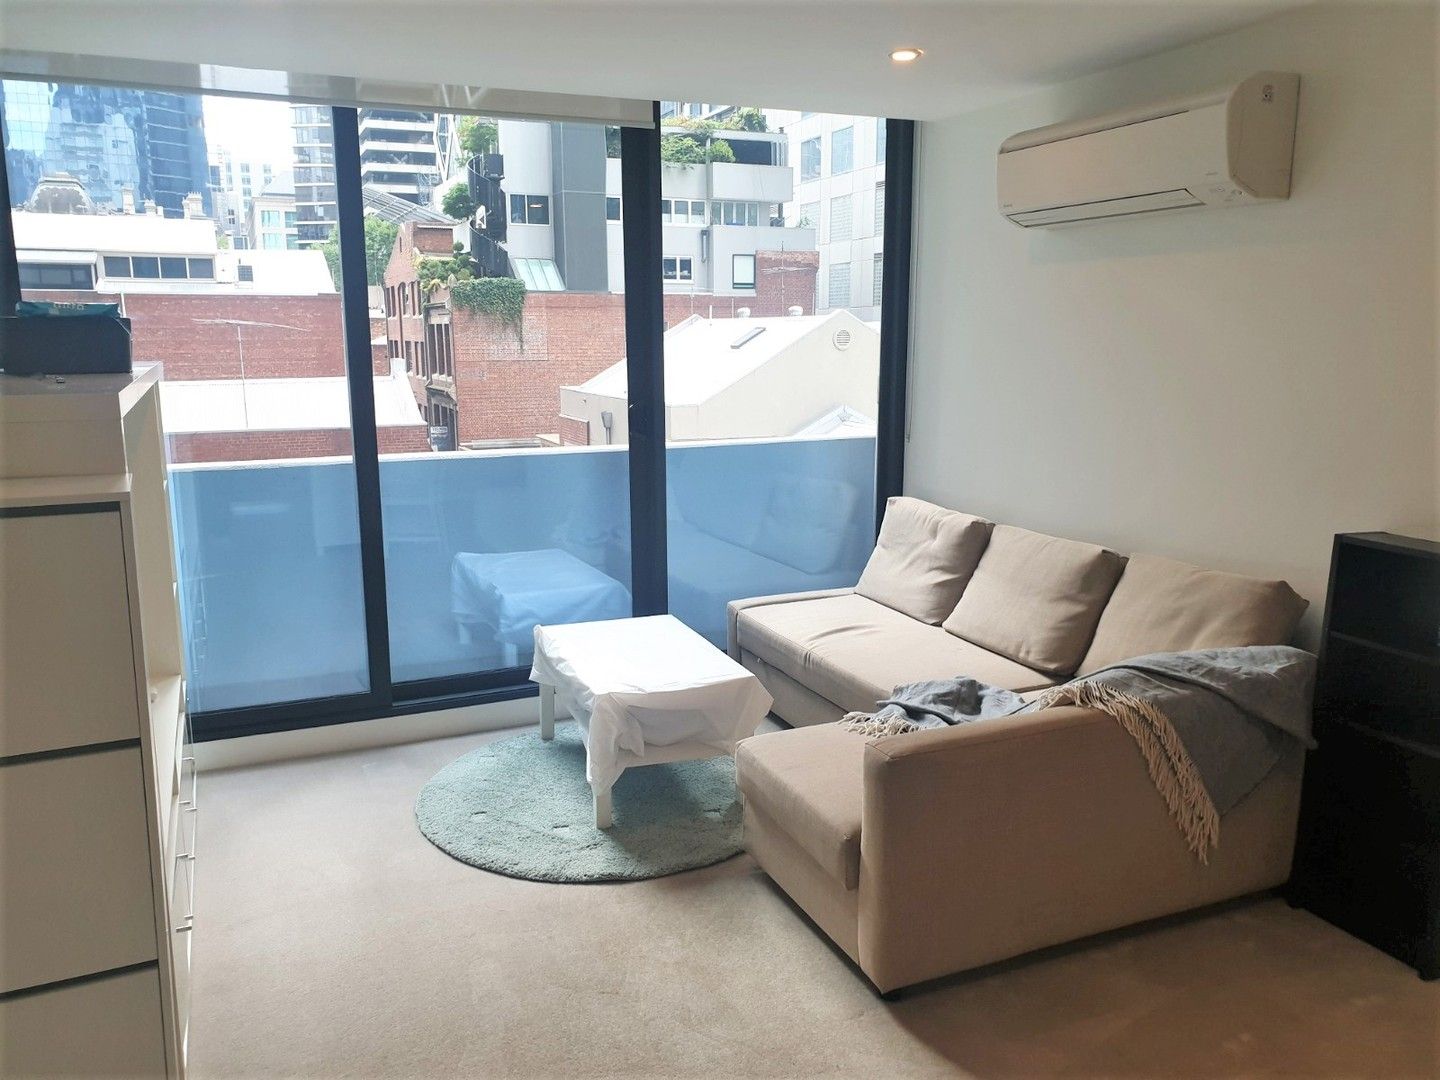 3 bedrooms Apartment / Unit / Flat in 307/8 Sutherland Street MELBOURNE VIC, 3000